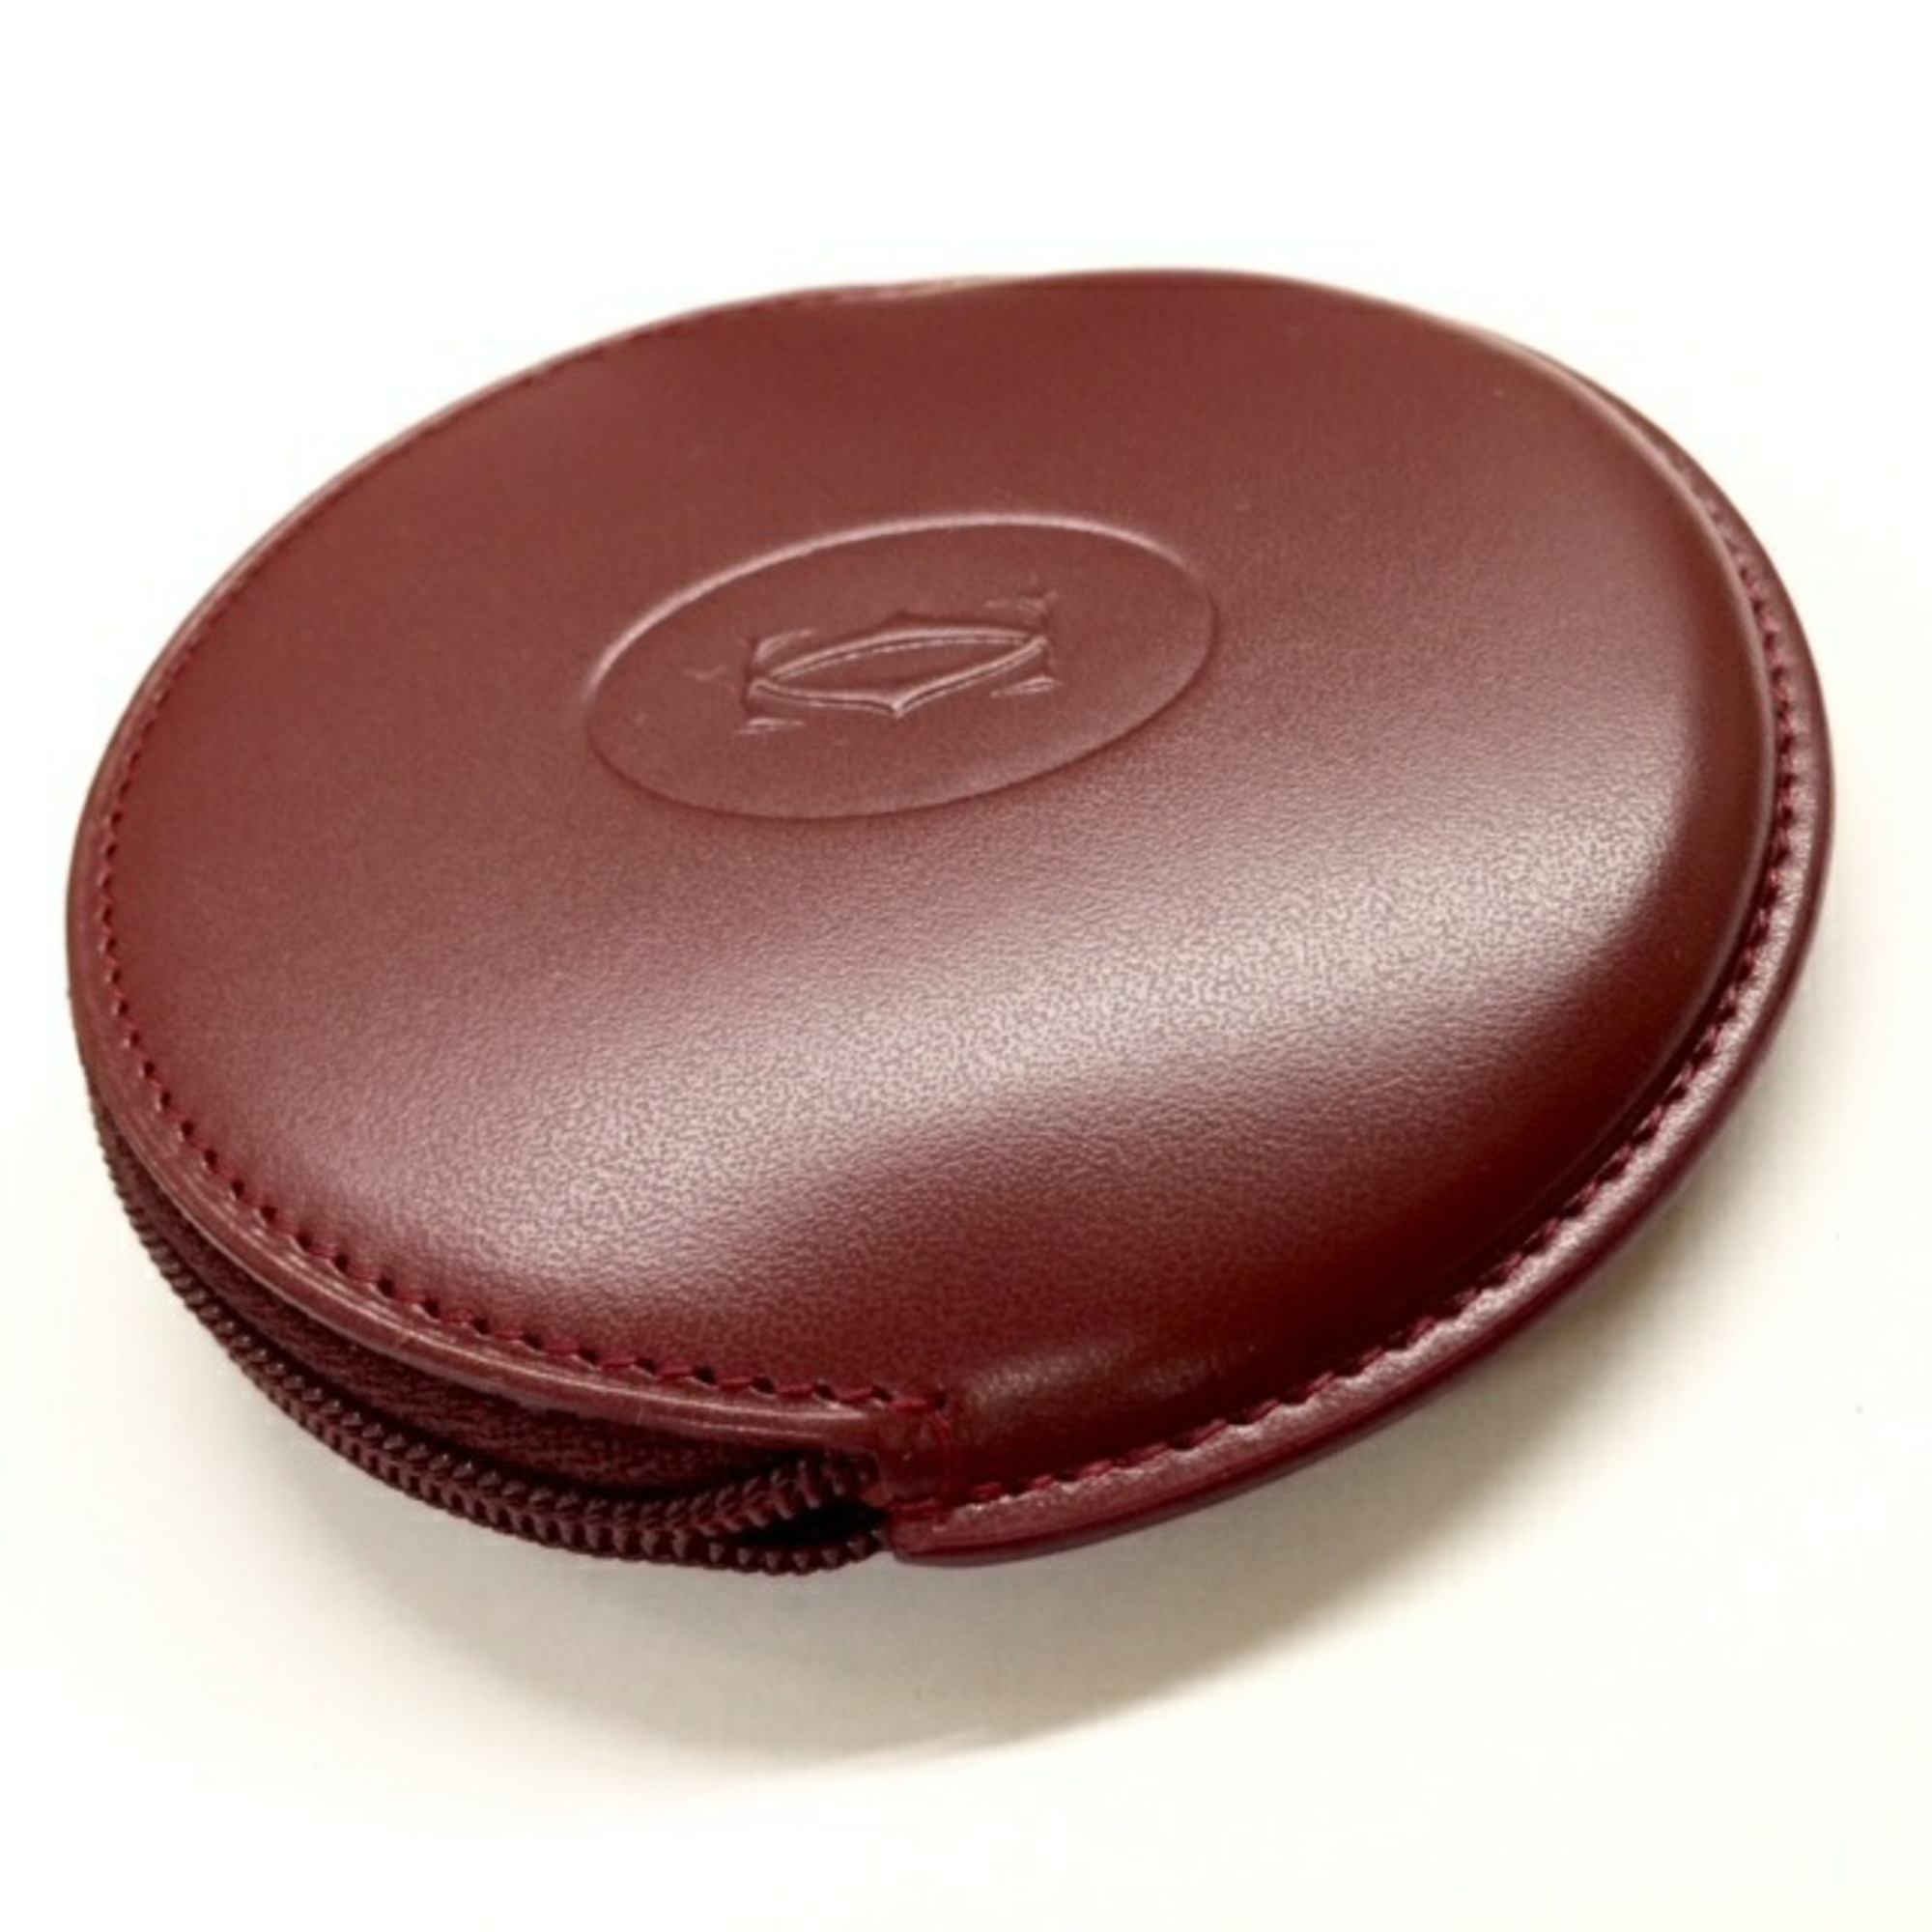 CARTIER Mustline Coin Case Wallet Mini Bordeaux Red Leather Ladies Men's Fashion Accessories USED